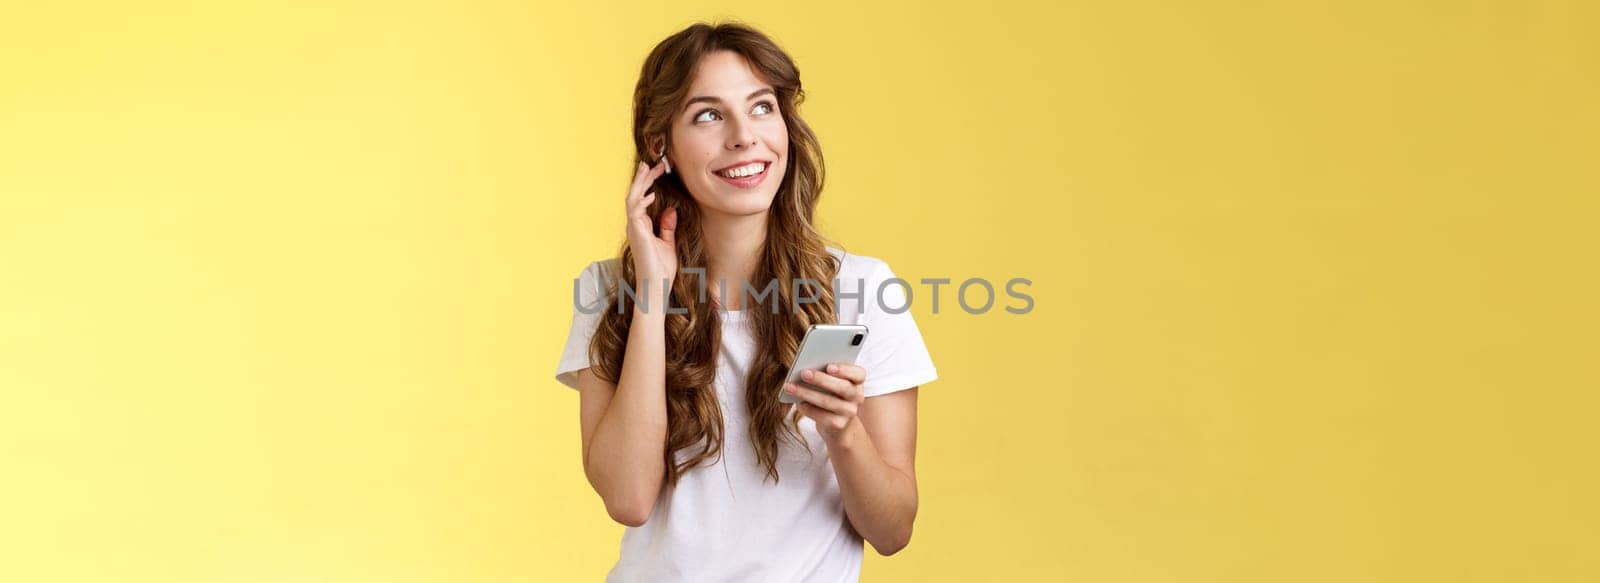 Dreamy happy cheerful curly-haired girl look around contemplate beautiful summer weather listening music touch wireless earbud calling friend talking via earphones hold smartphone yellow background. Lifestyle.